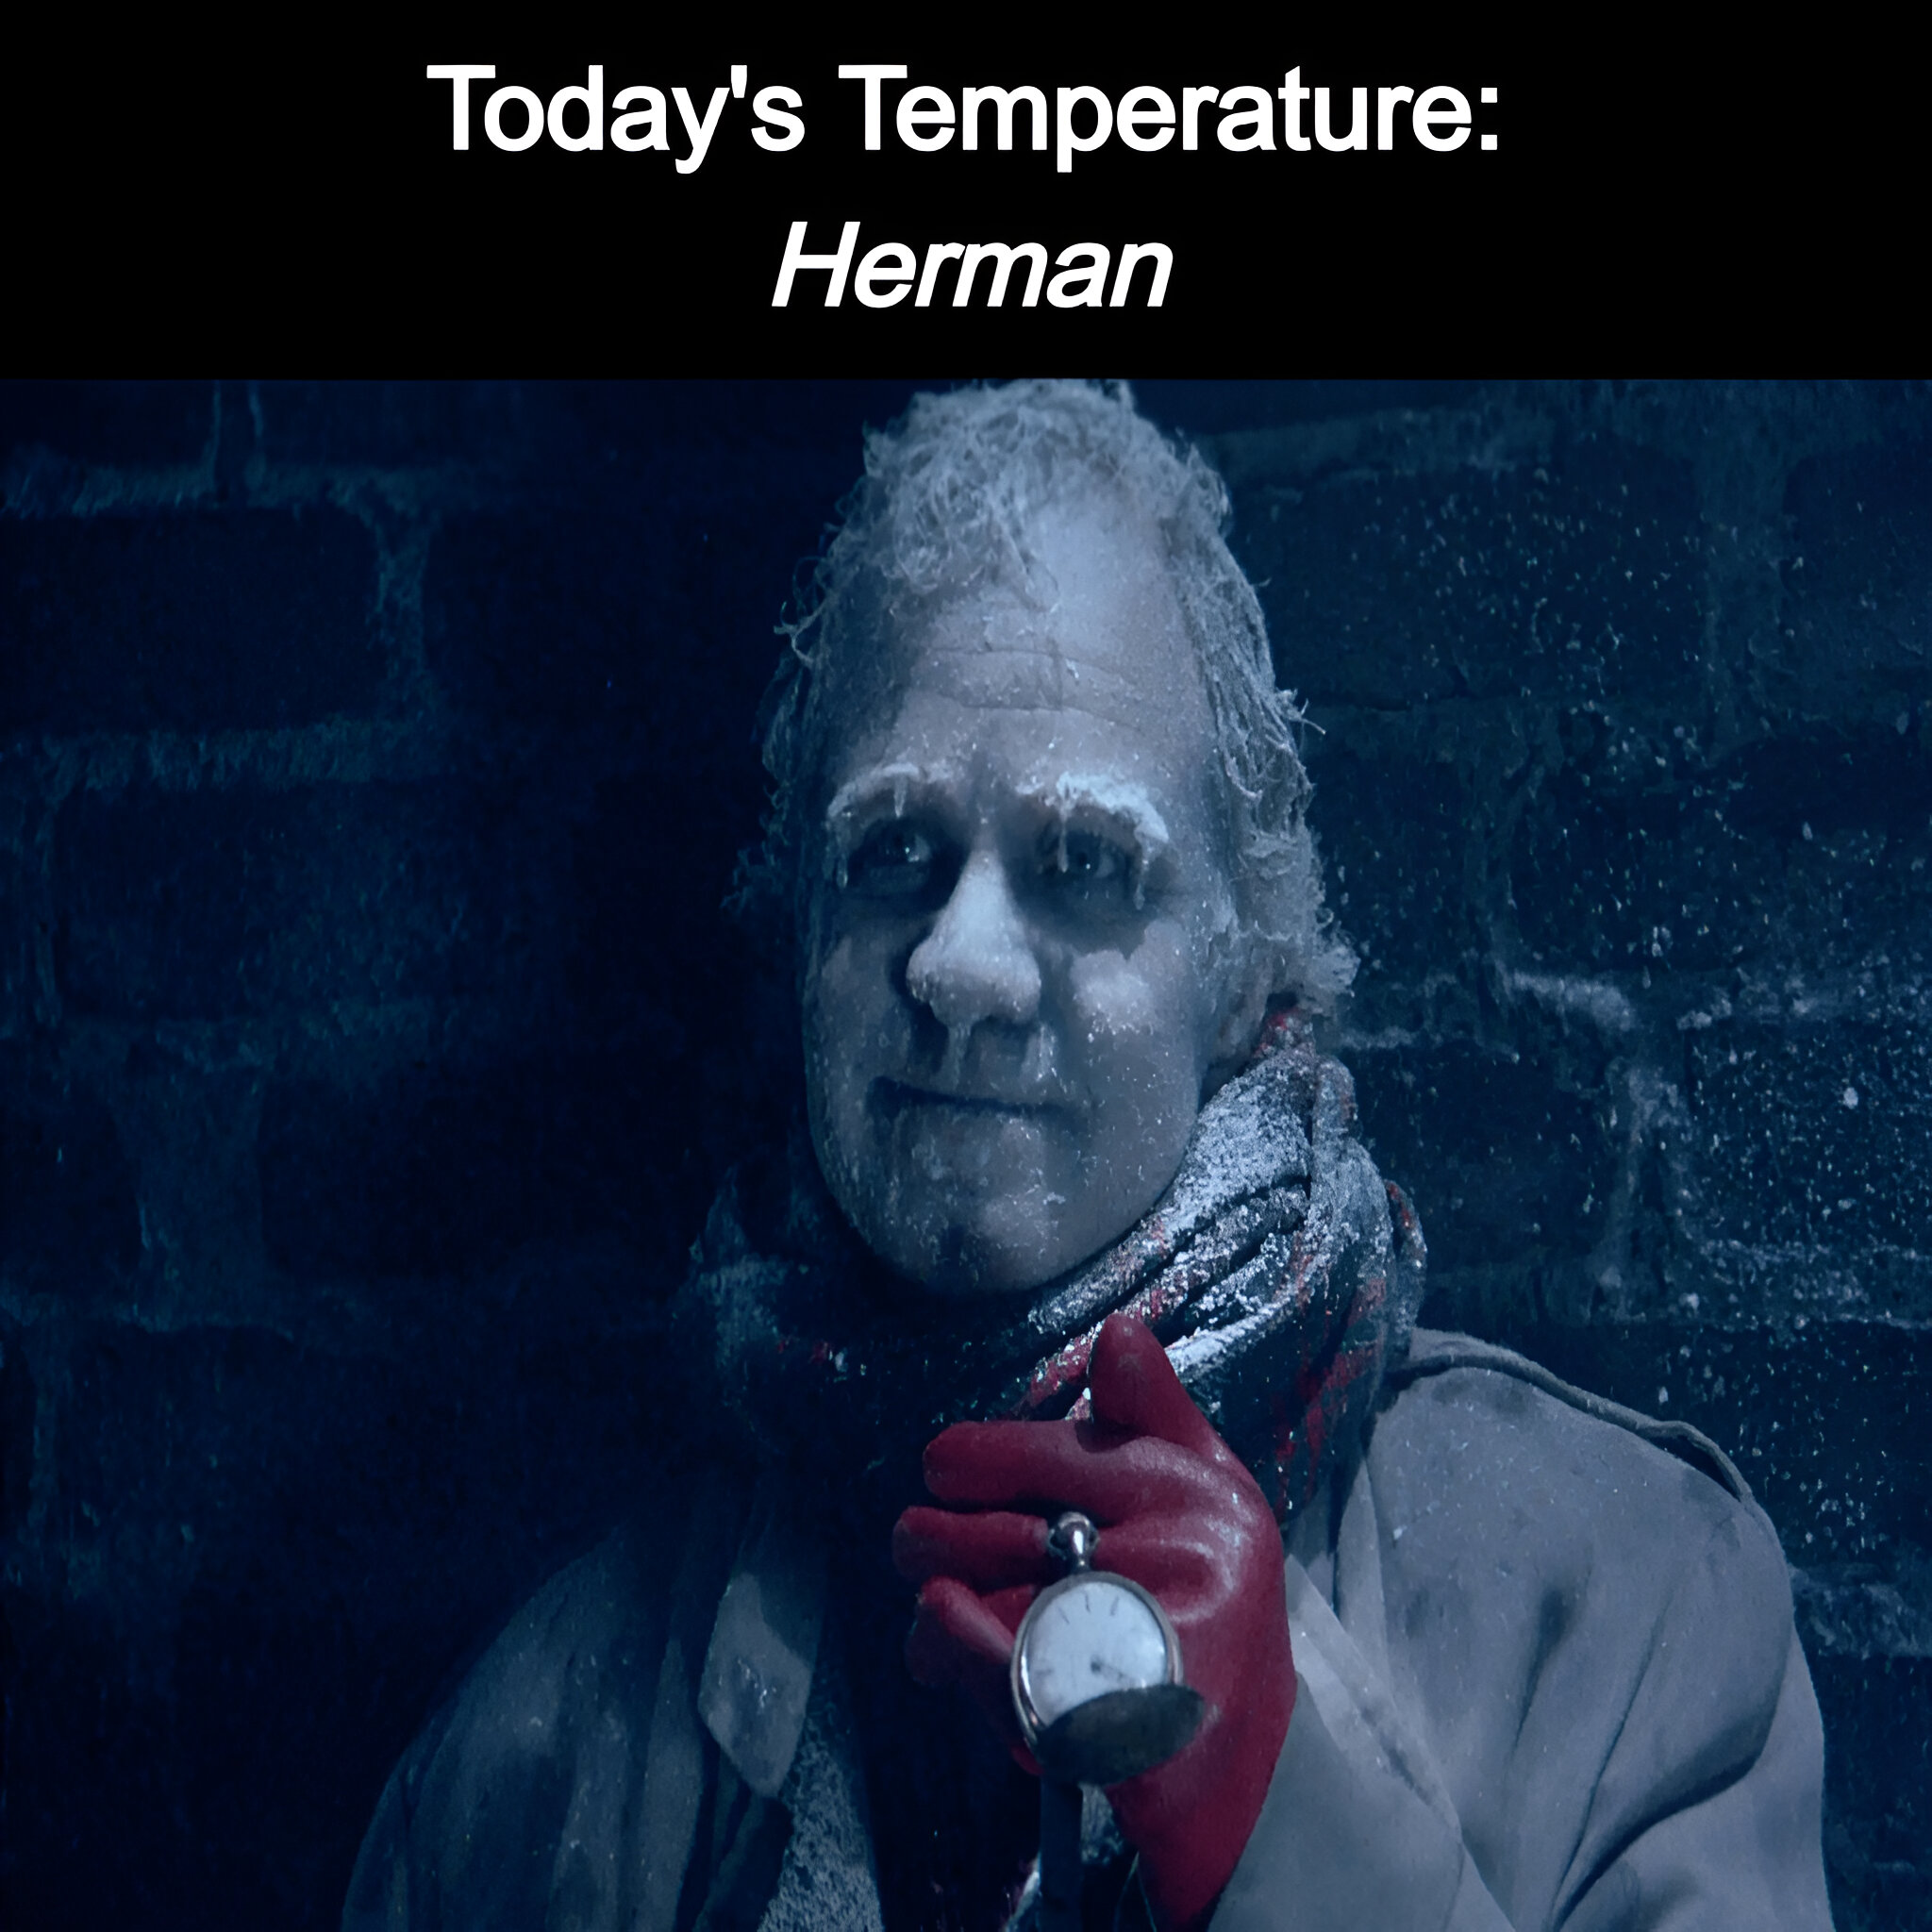 This day’s temperature: Herman